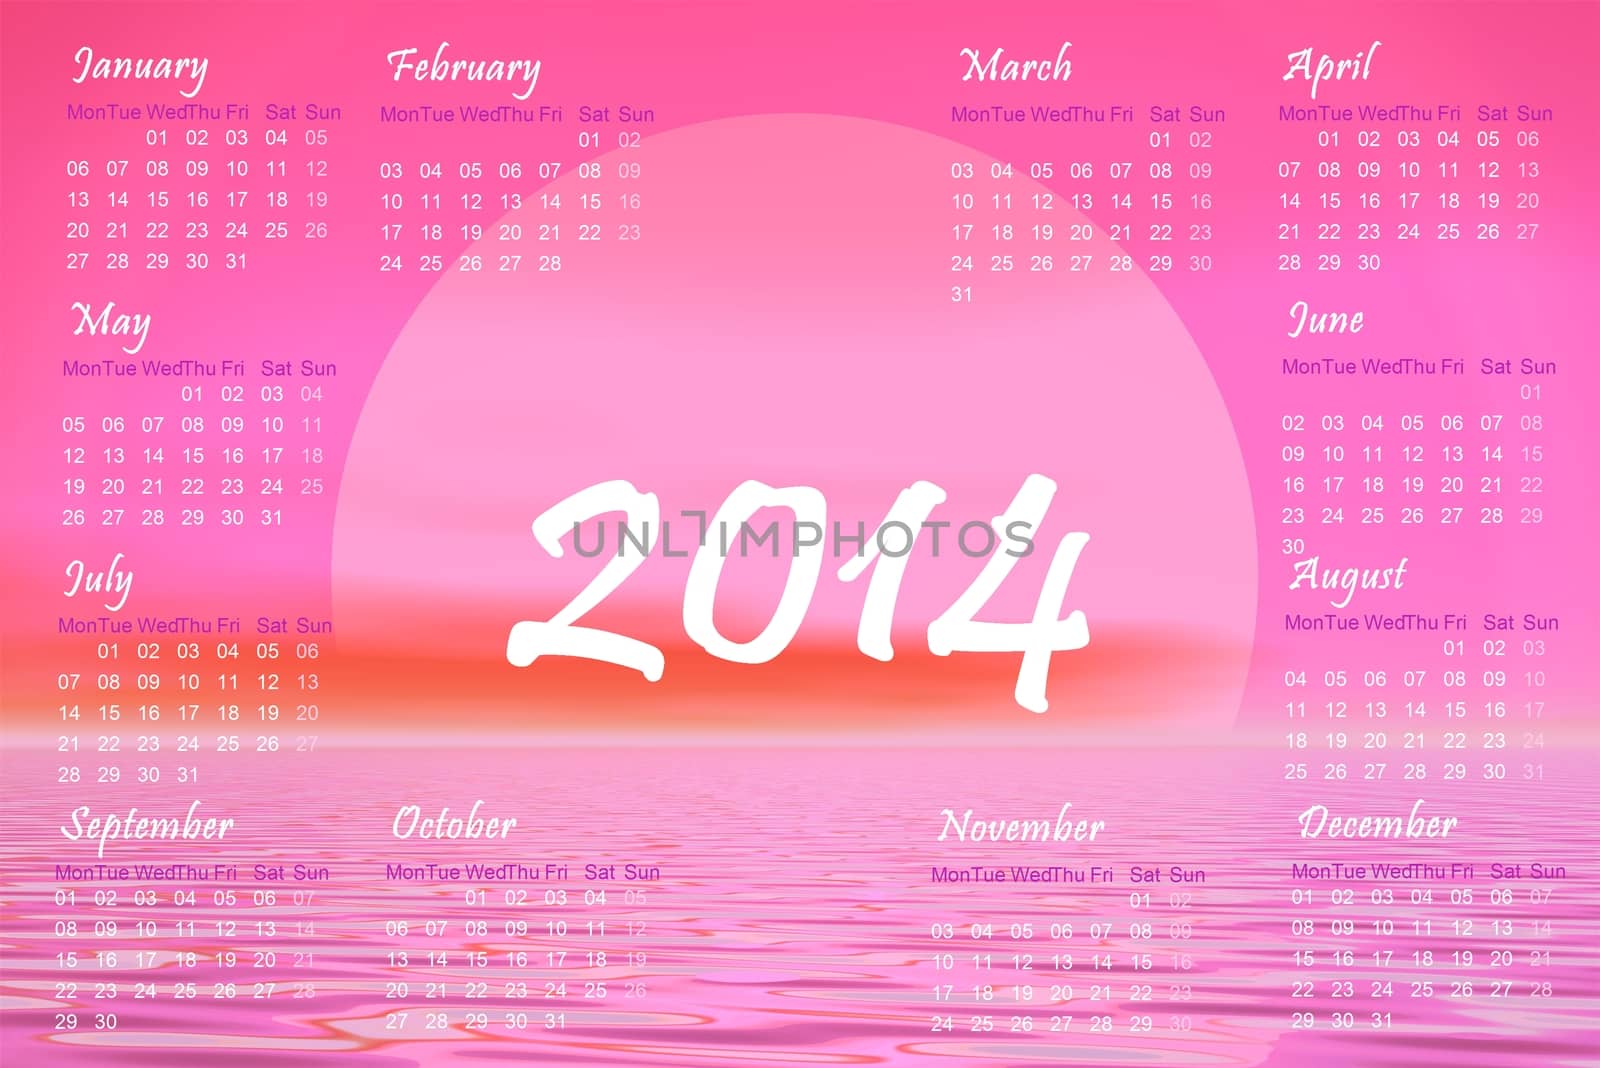 English 2014 monthly calendar and pink sunset over the ocean